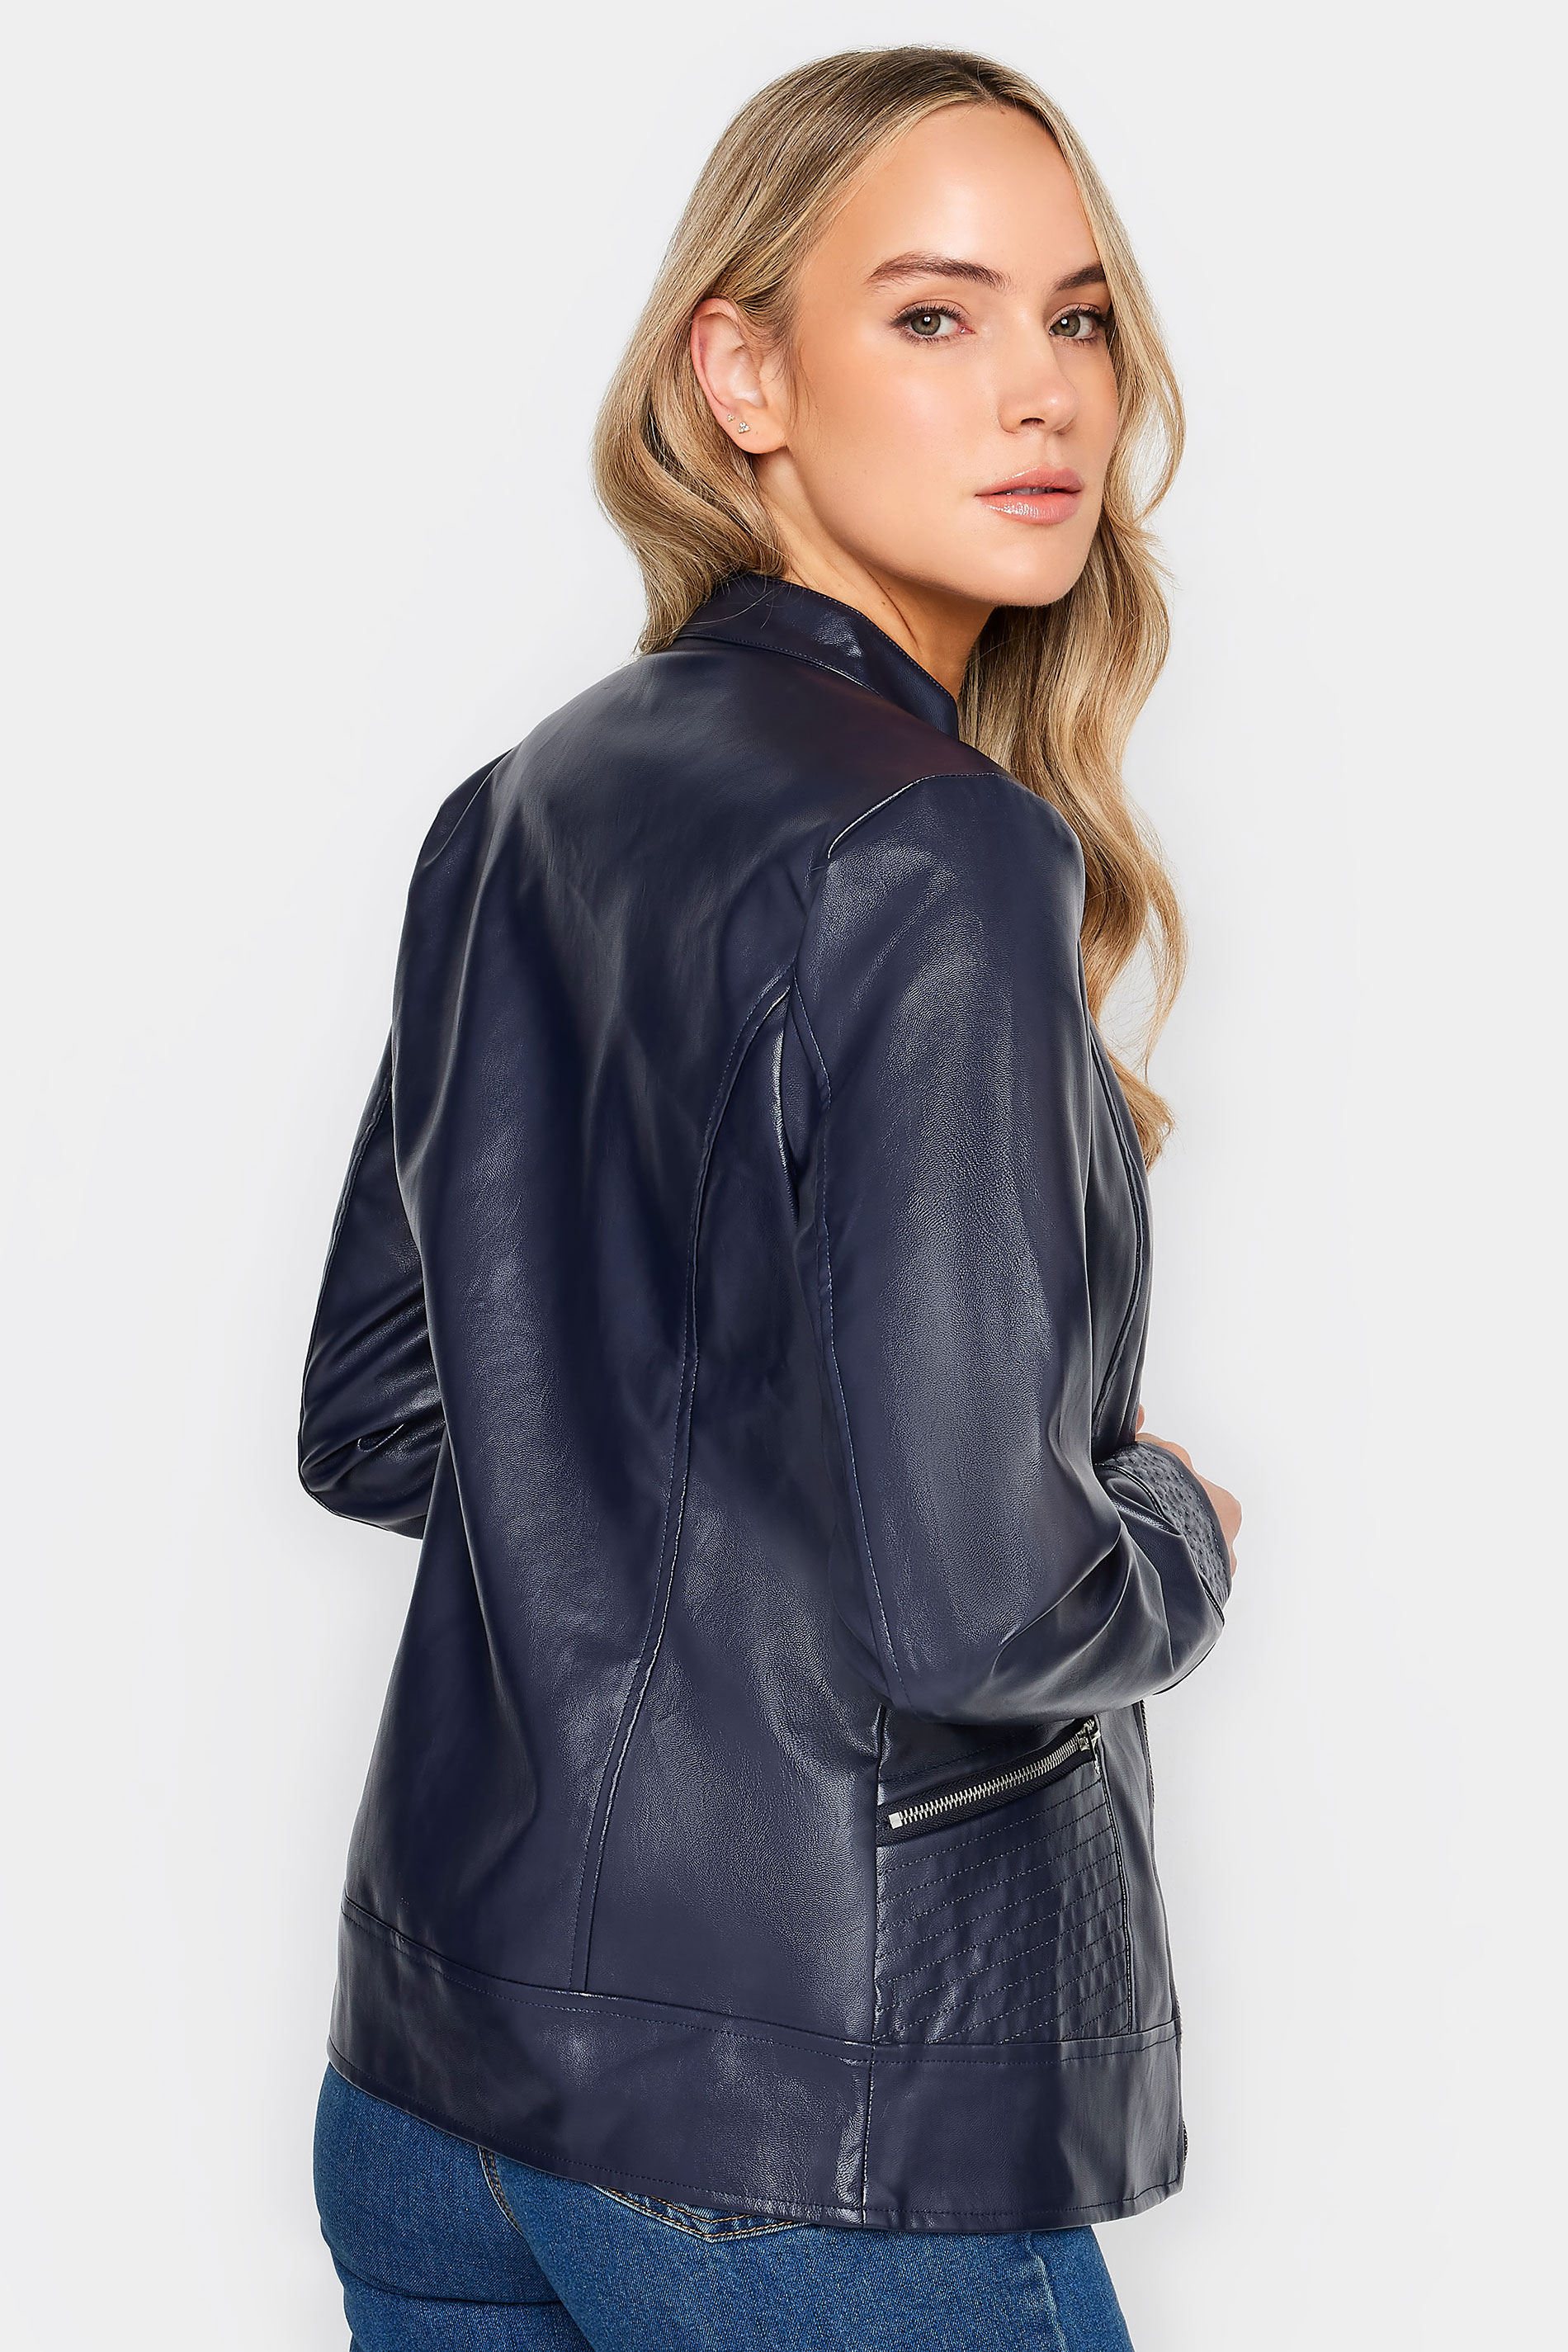 LTS Tall Navy Blue Leather Funnel Neck Jacket | Long Tall Sally  3